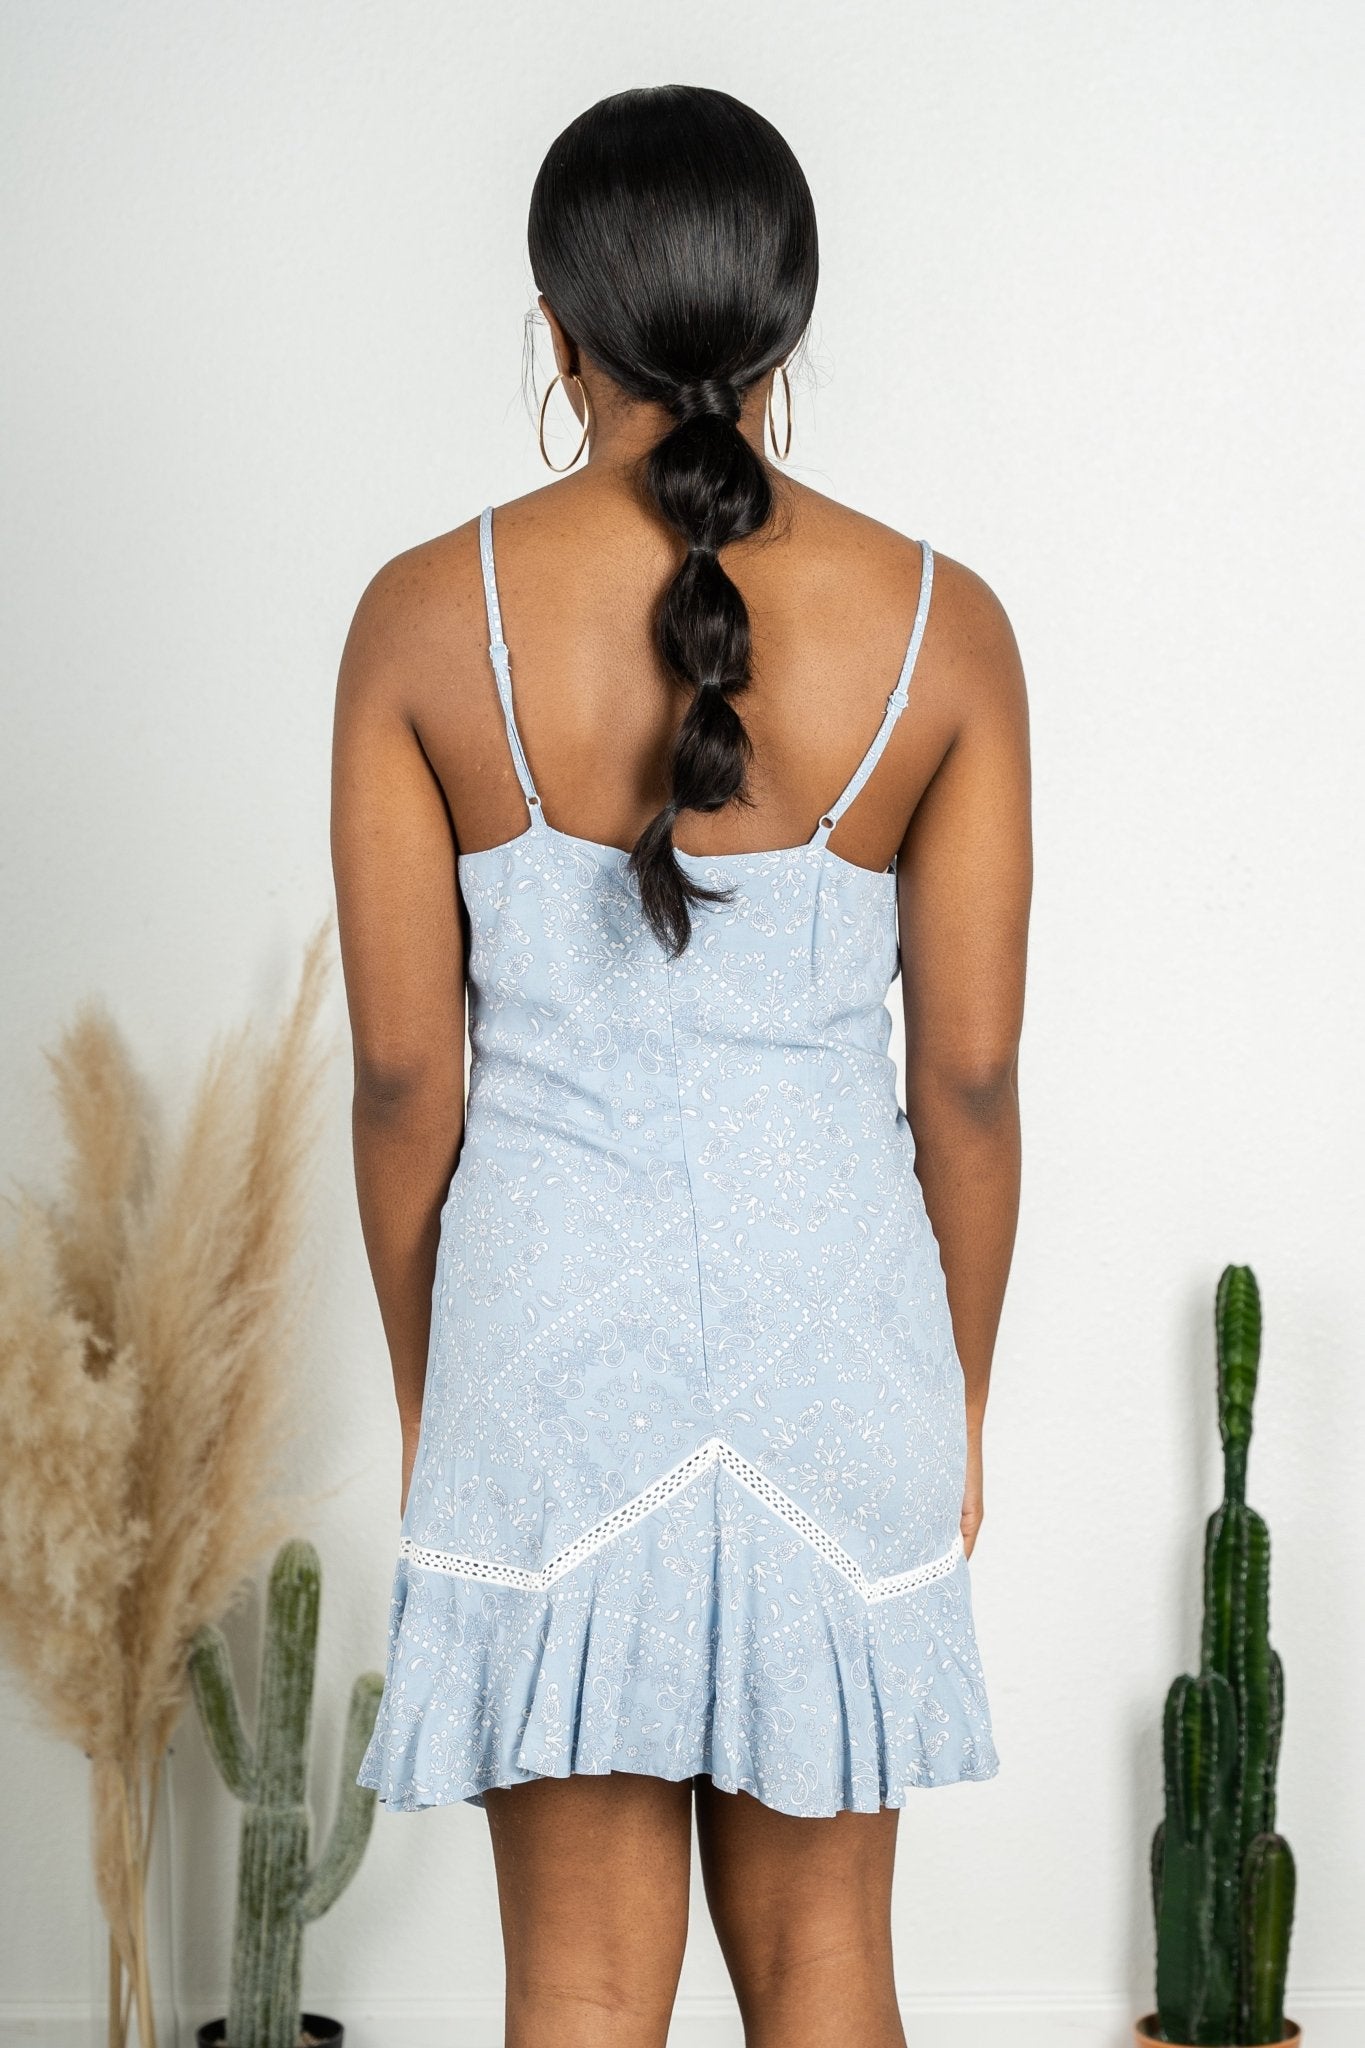 Paisley cowl neck dress baby blue - Affordable dress - Boutique Dresses at Lush Fashion Lounge Boutique in Oklahoma City